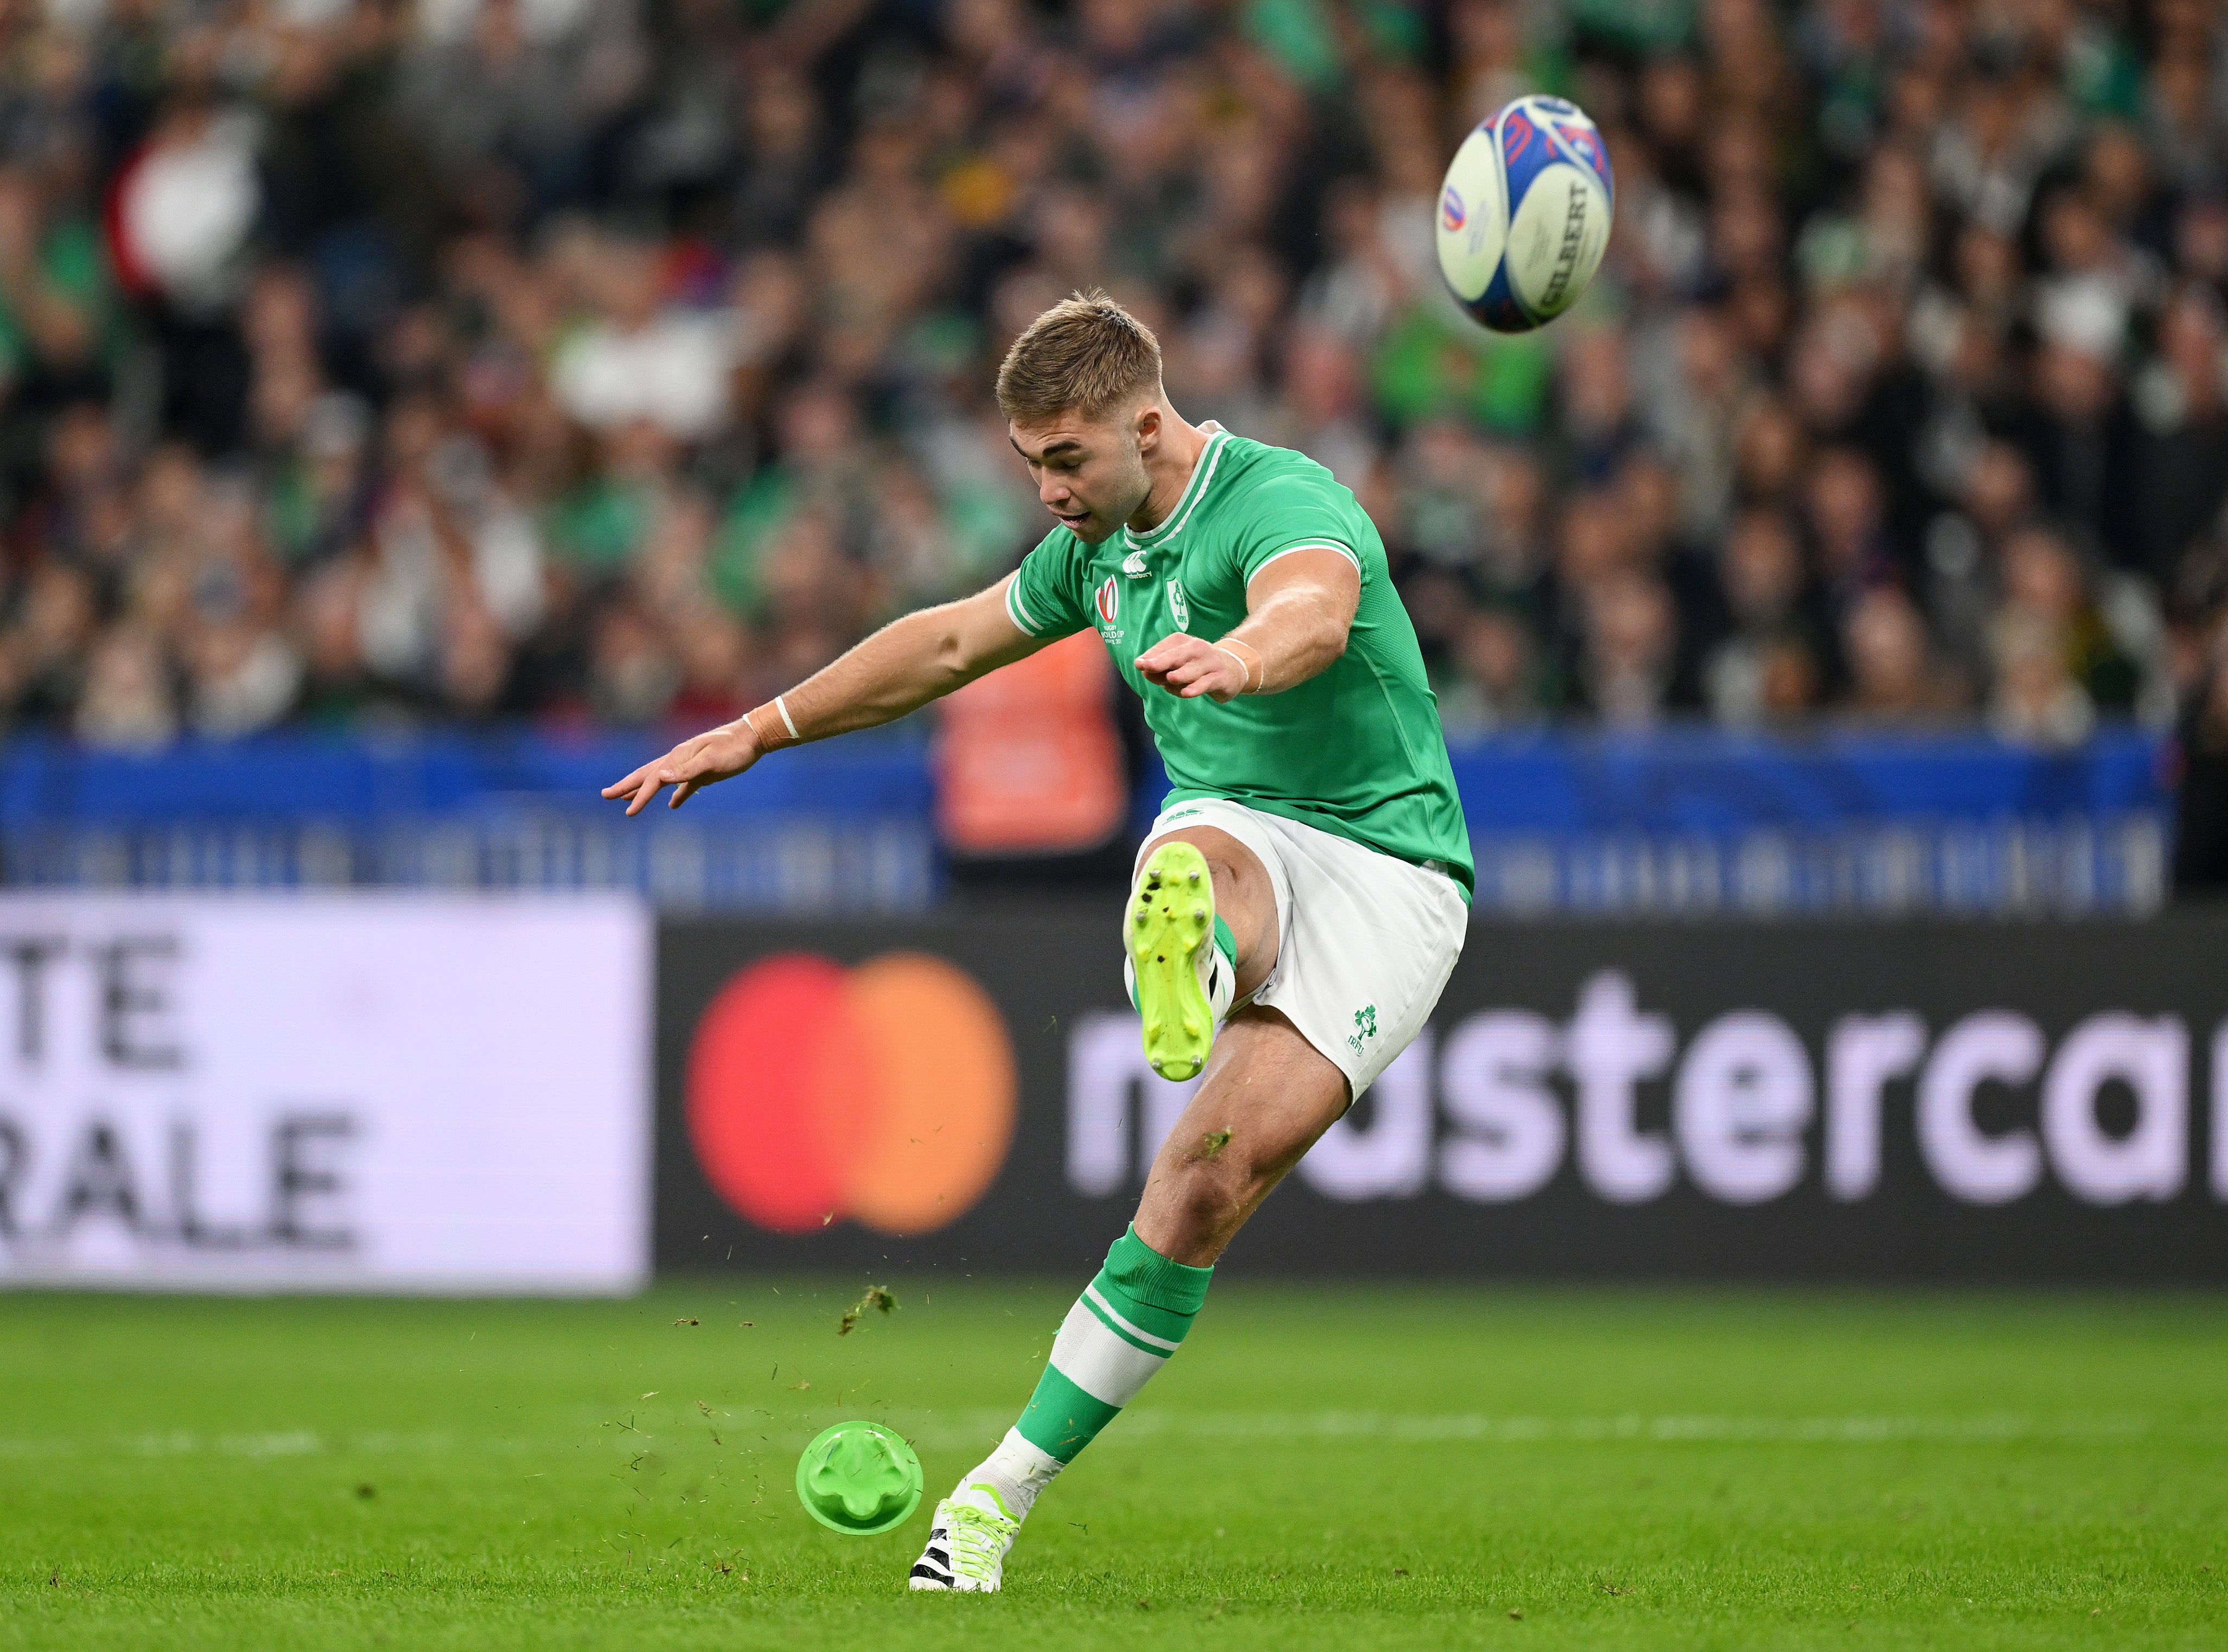 Jack Crowley will try to be Johnny Sexton’s long-term successor as Ireland’s No 10